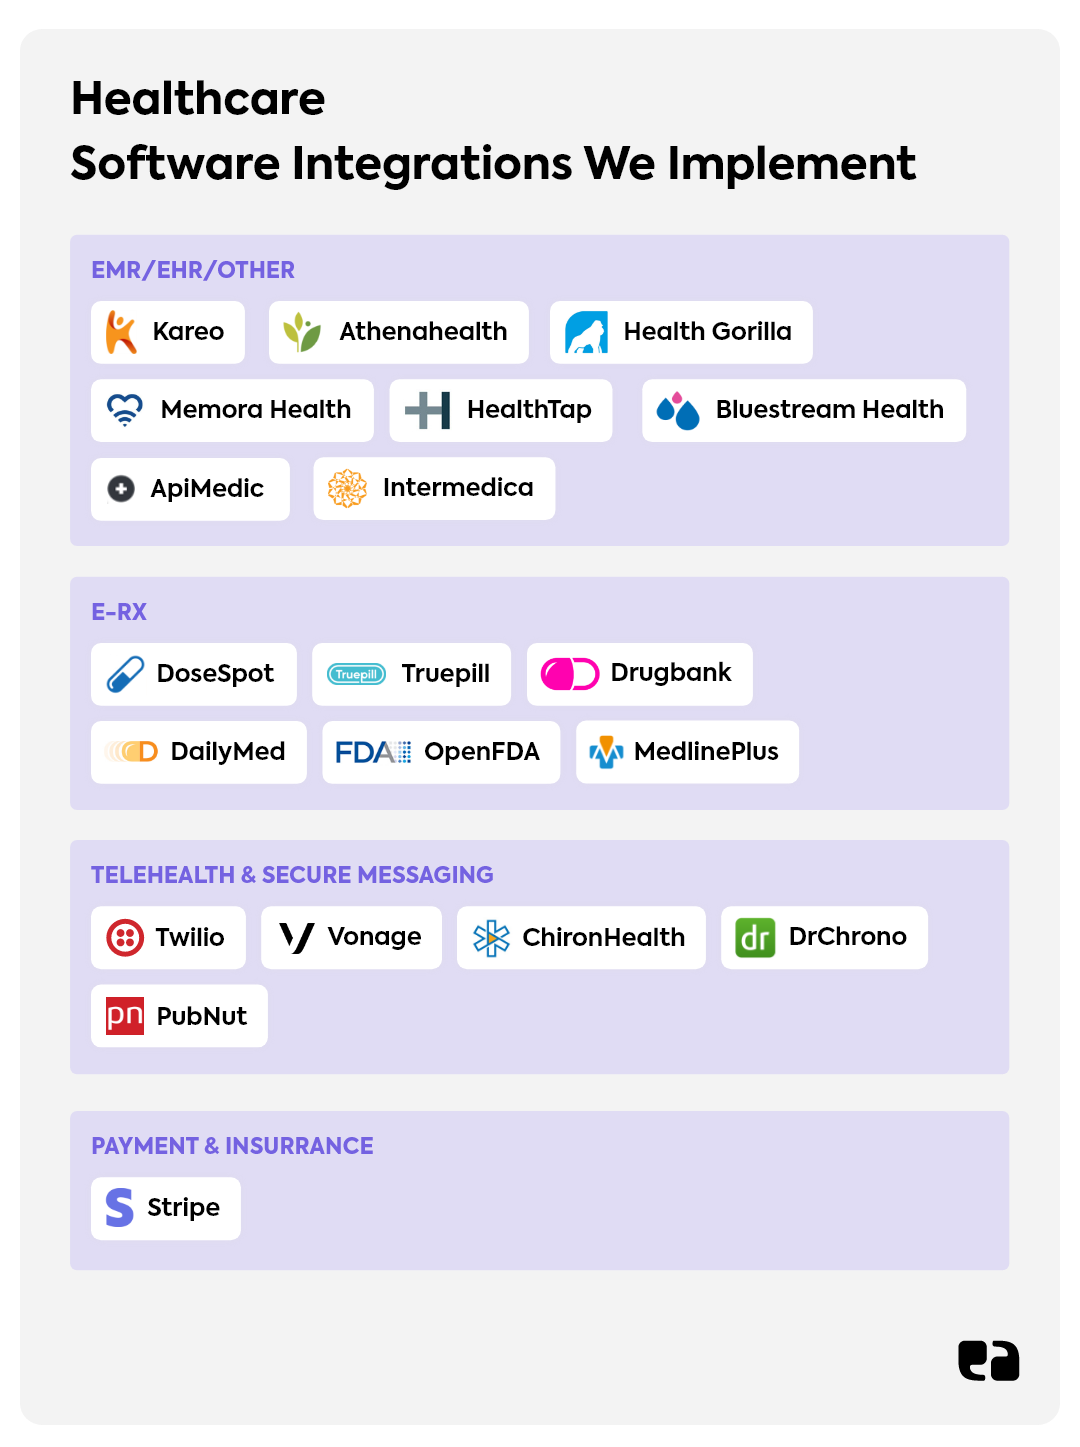 Healthcare integrations